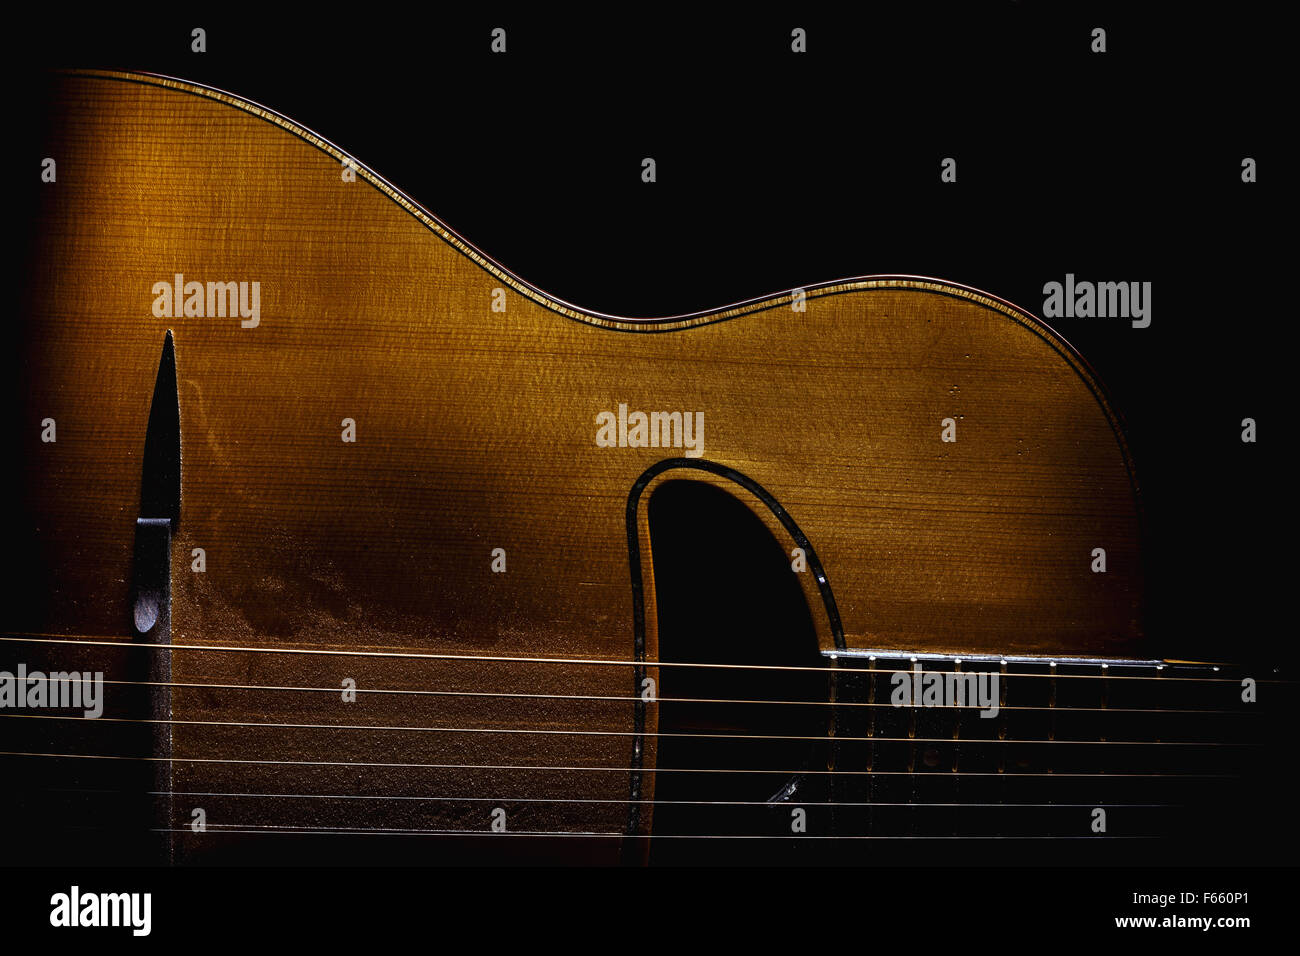 Part of a gypsy acoustic guitar, body part details. Stock Photo